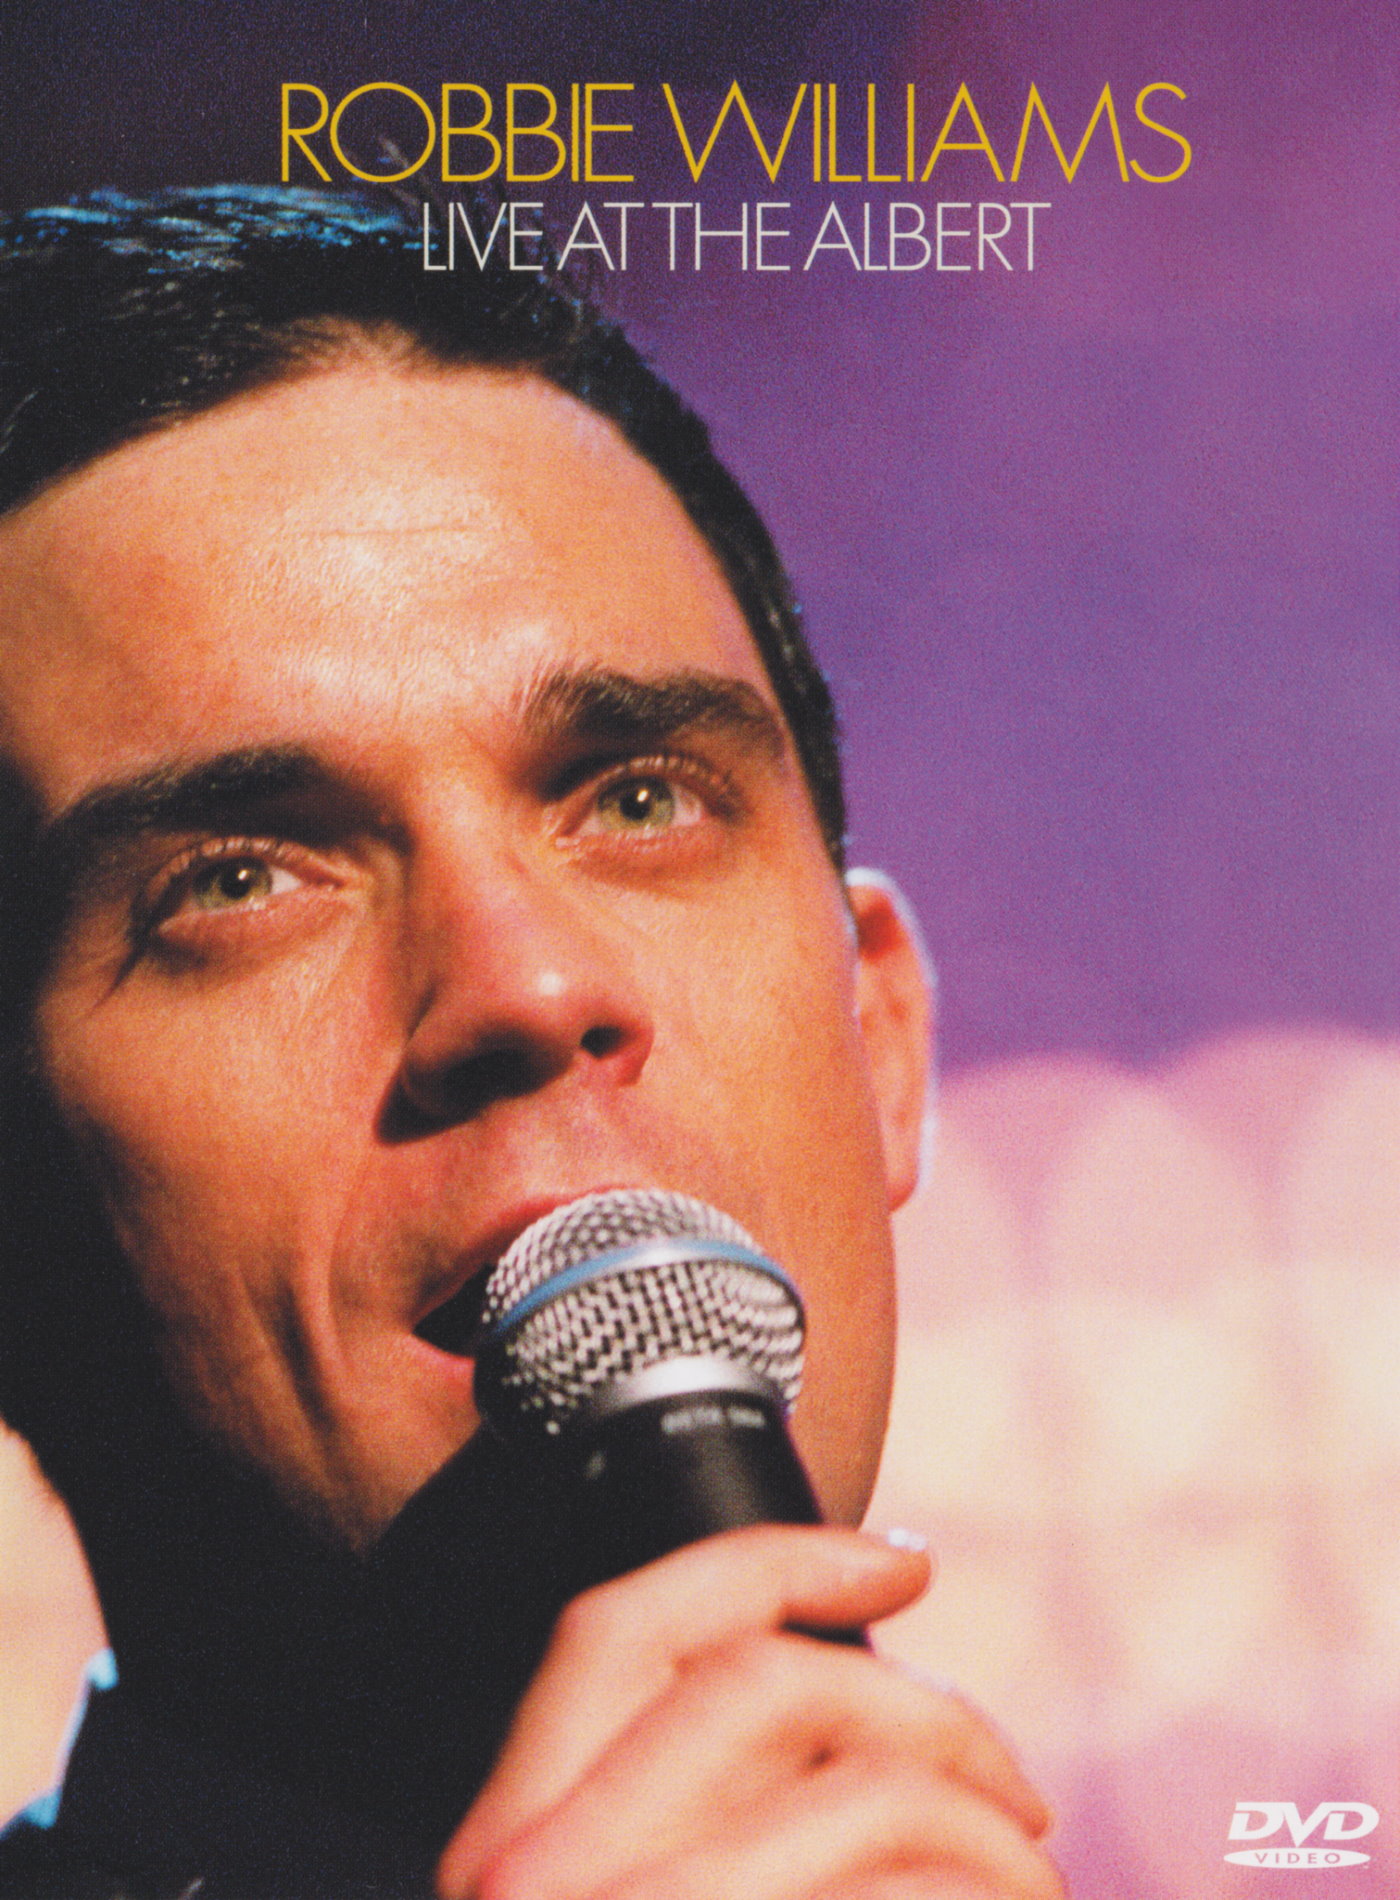 Cover - Robbie Williams - Live at the Albert.jpg